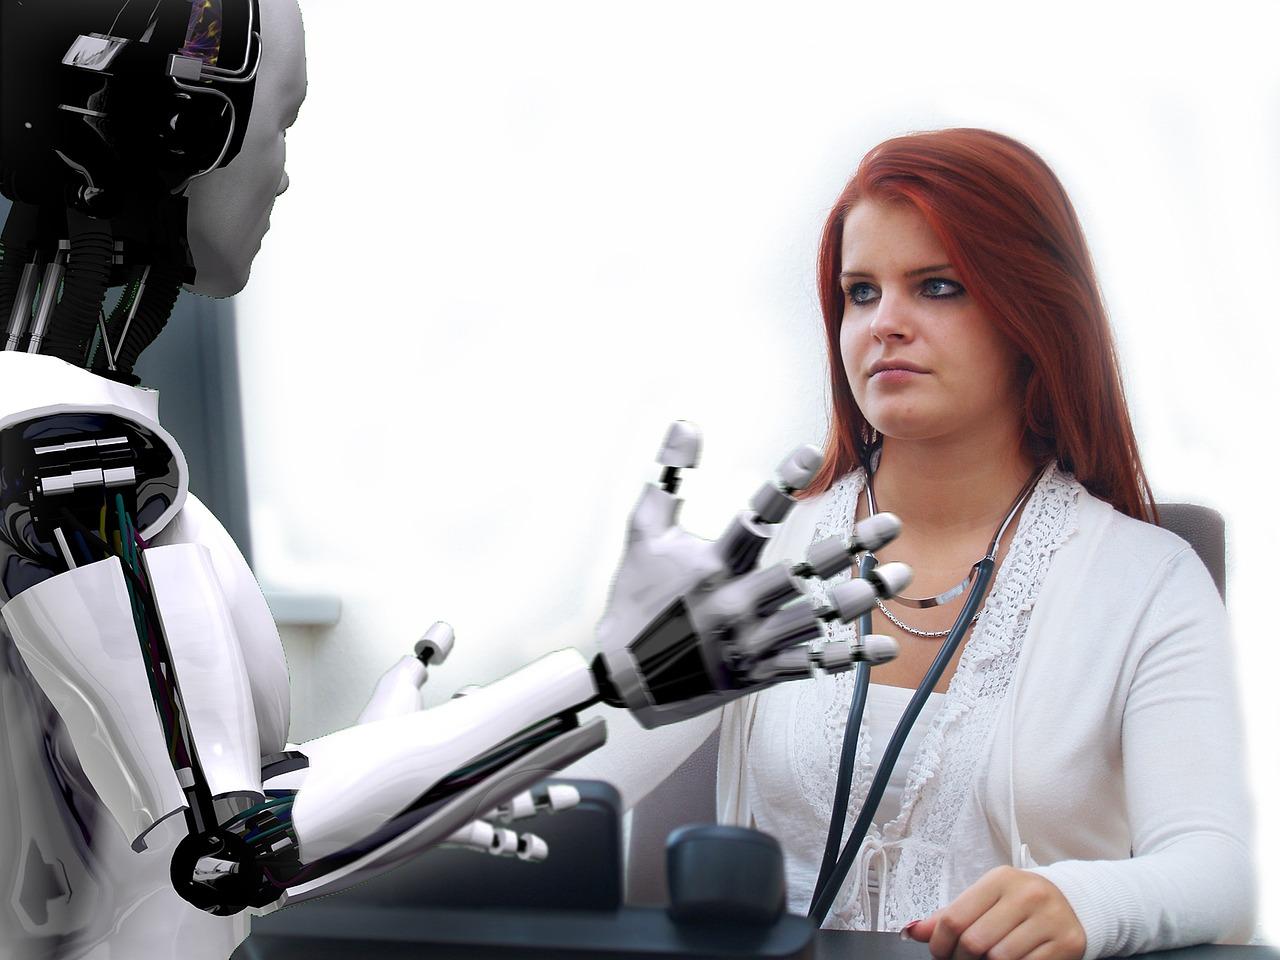 A robot is instructing a female doctor